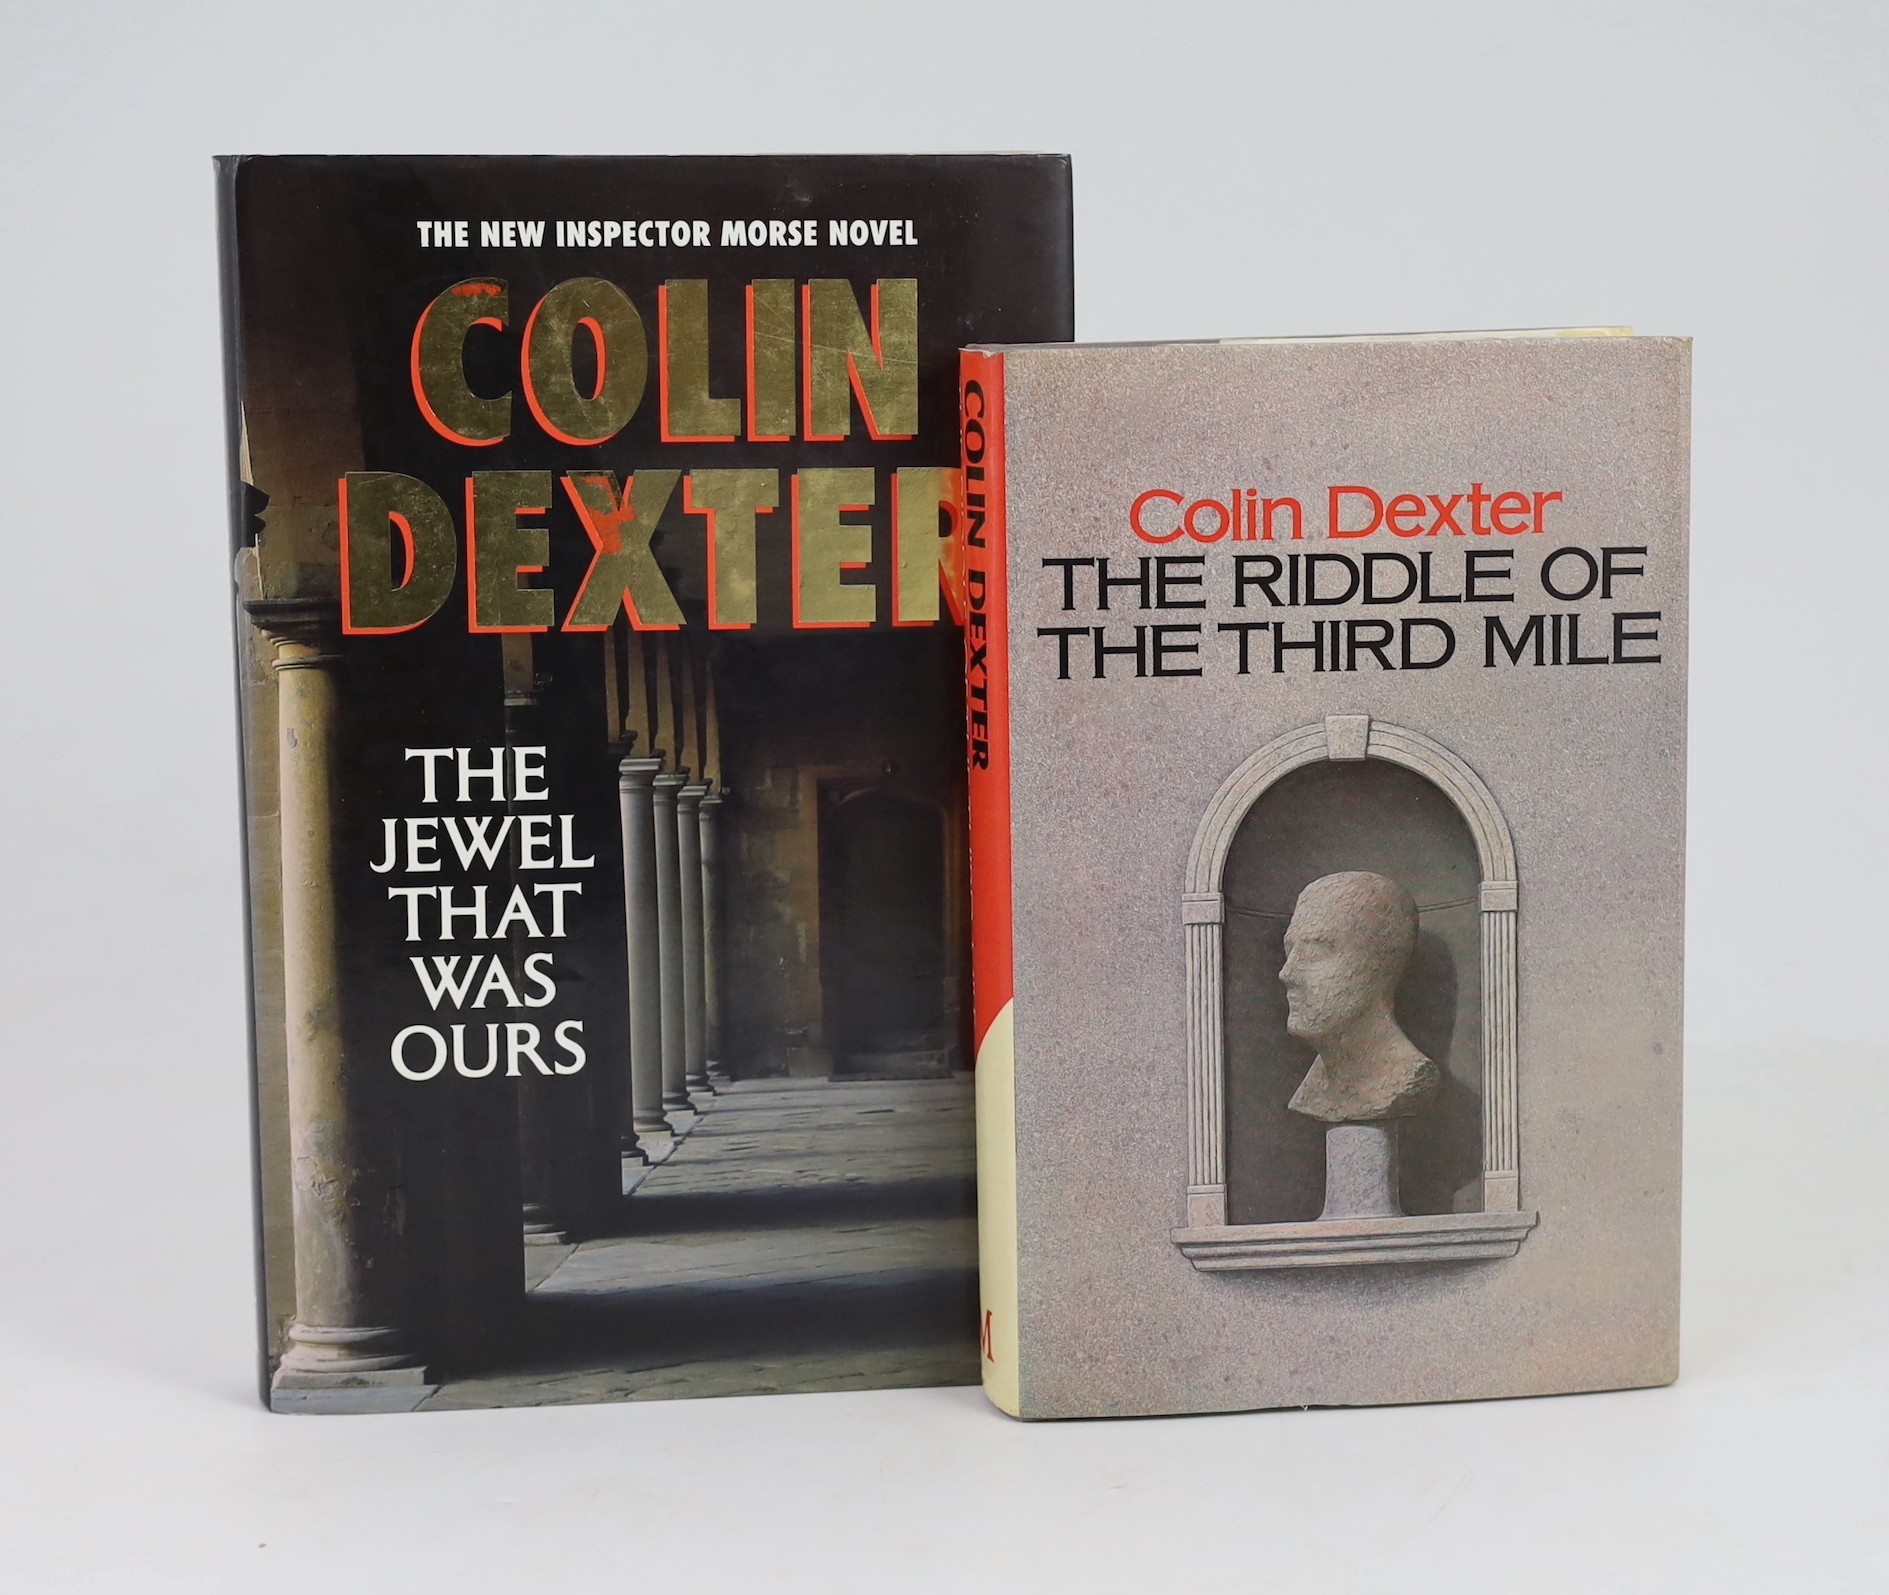 Dexter, Colin - 2 works - The Riddle of the Third Mile, 1st edition, signed on title page by the author, 8vo, original cloth in unclipped d/j, Macmillan, London, 1983 and The Jewel That Was Ours, 1st edition, signed on t